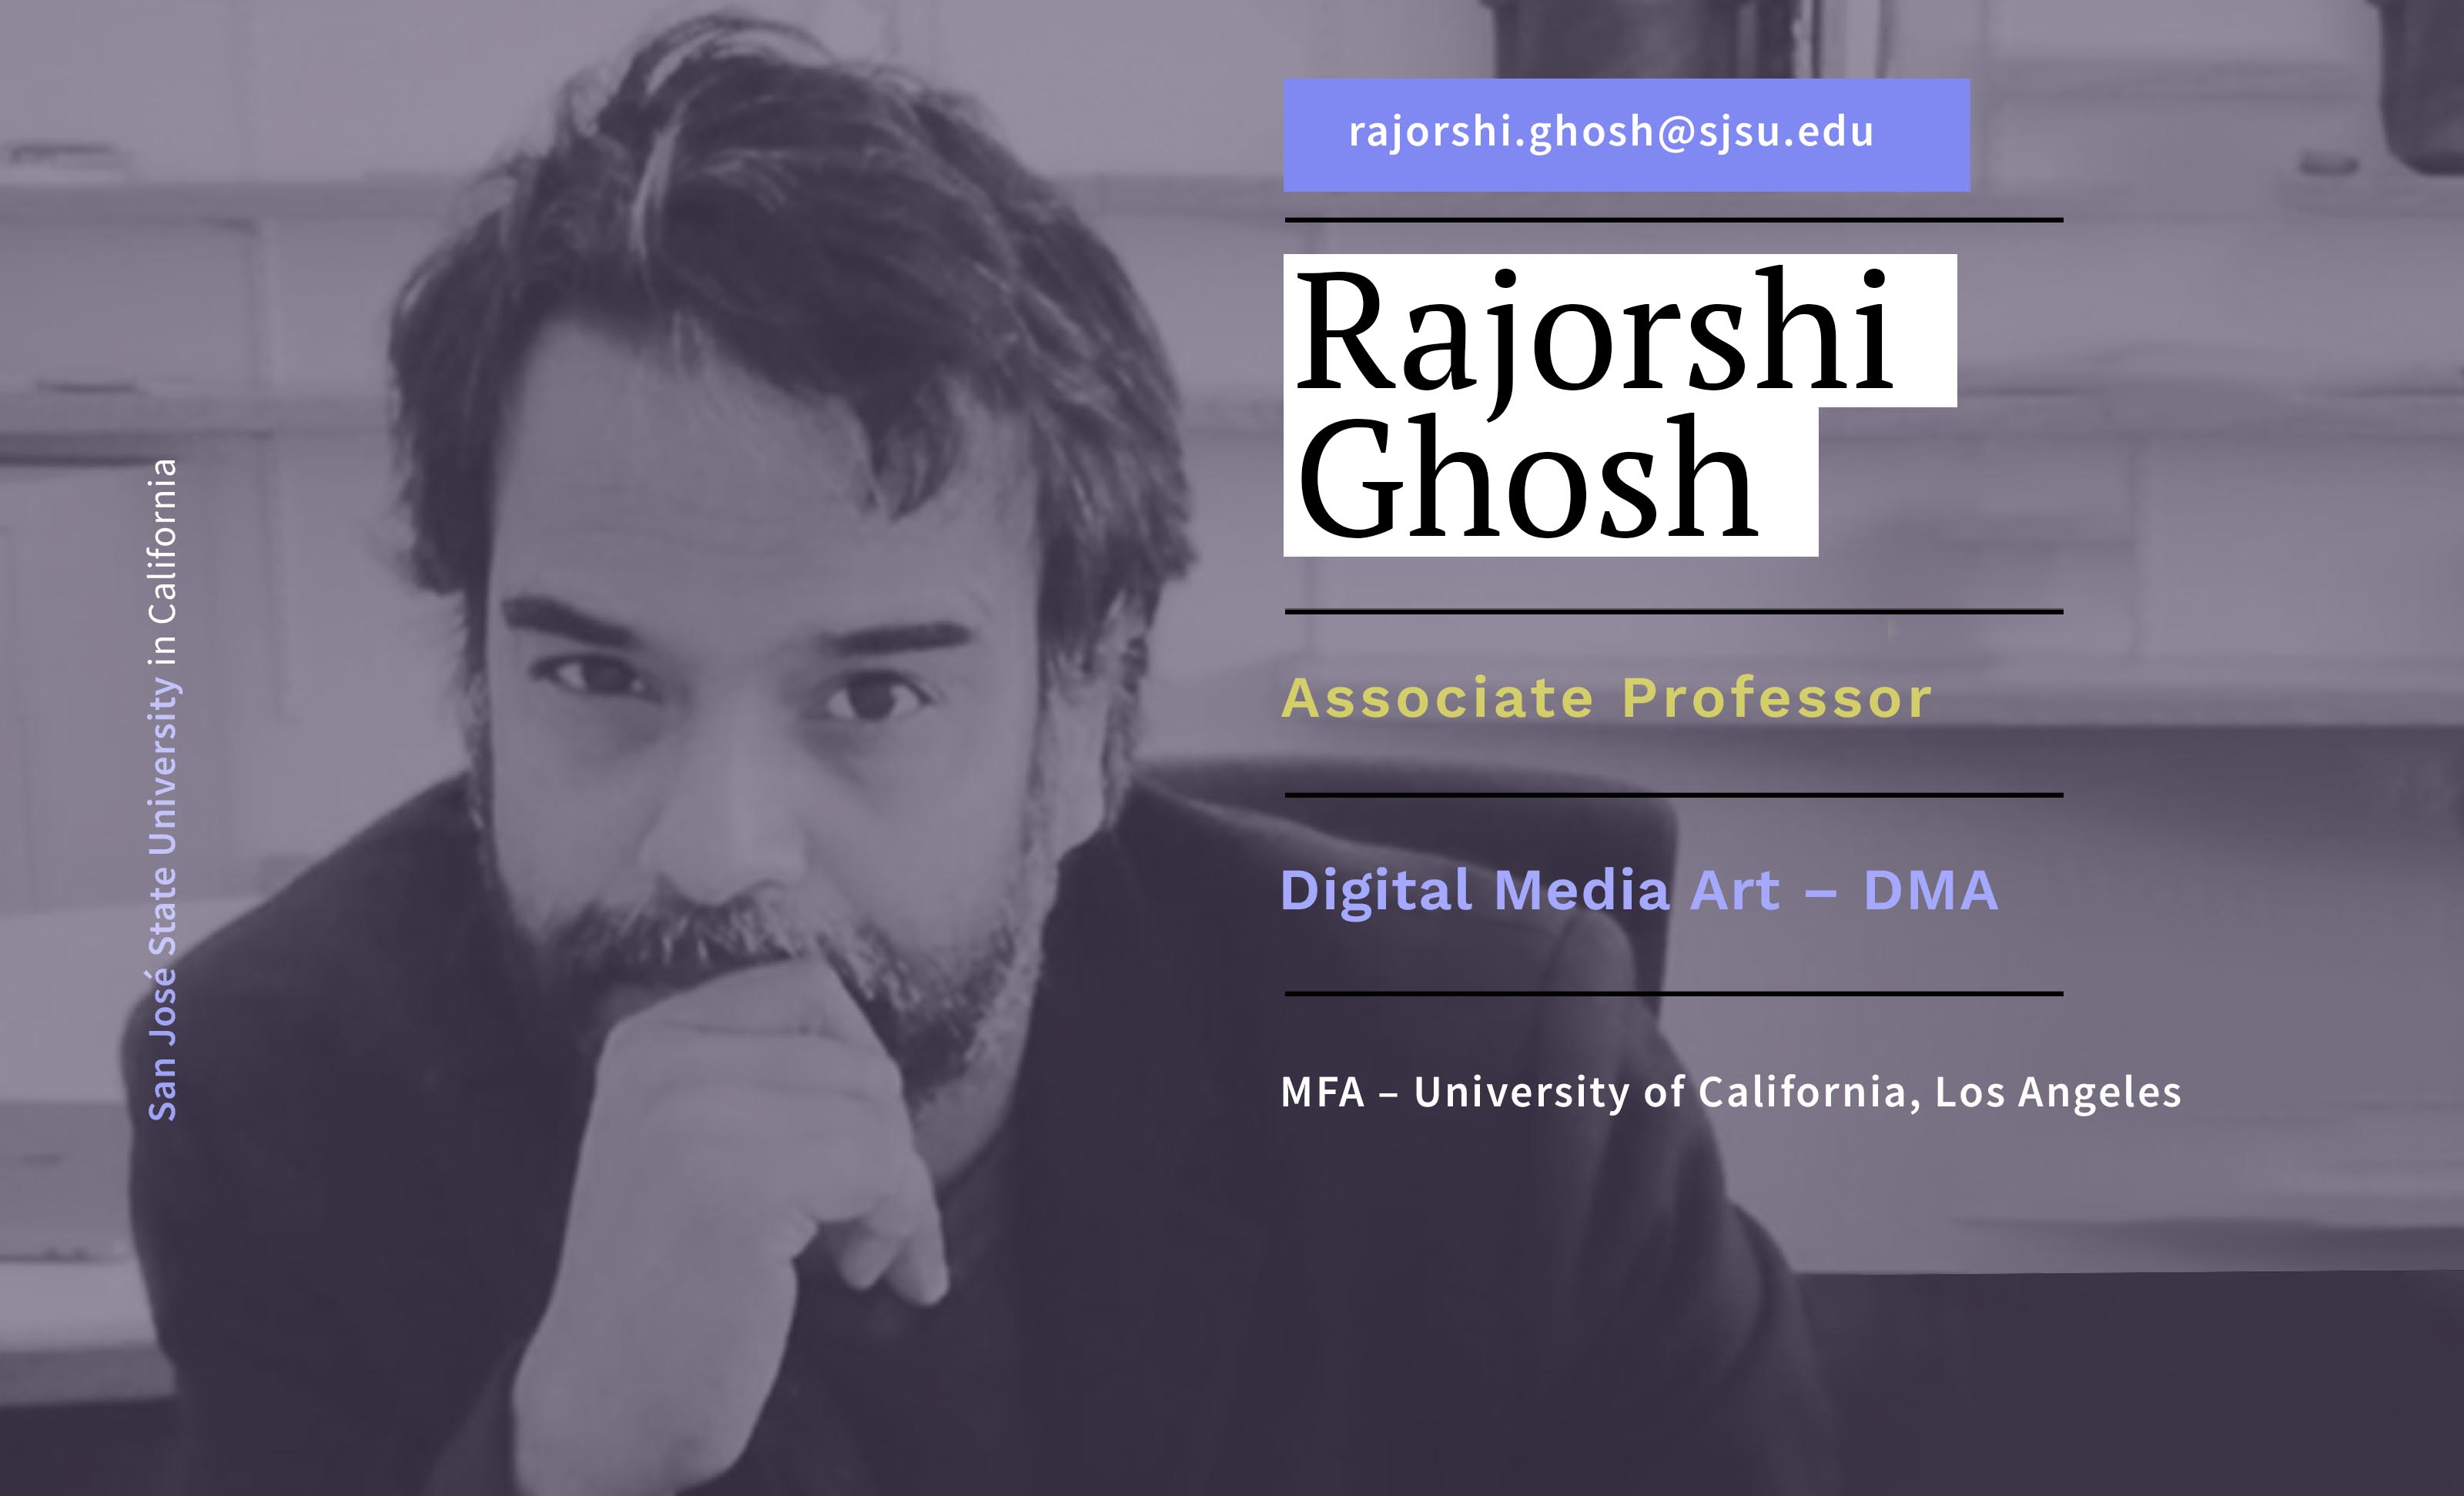 Faculty card image of Rajorshi Ghosh, listing his title and degree. 